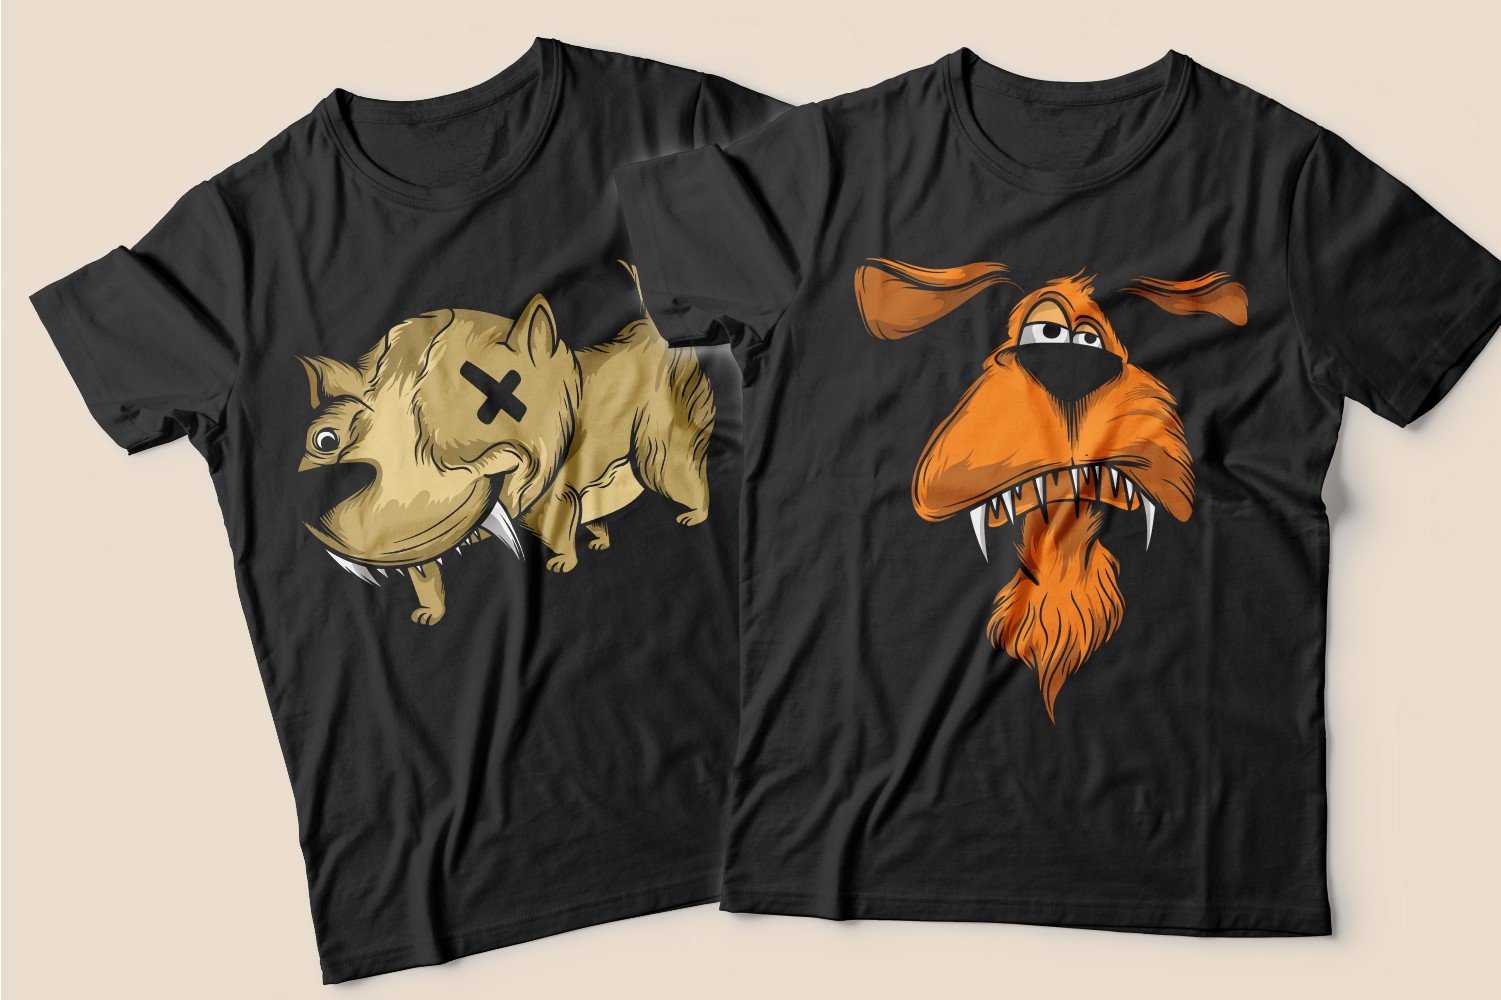 Two black T-shirts: one with a beaten dog, the other with a redhead and a sad one.